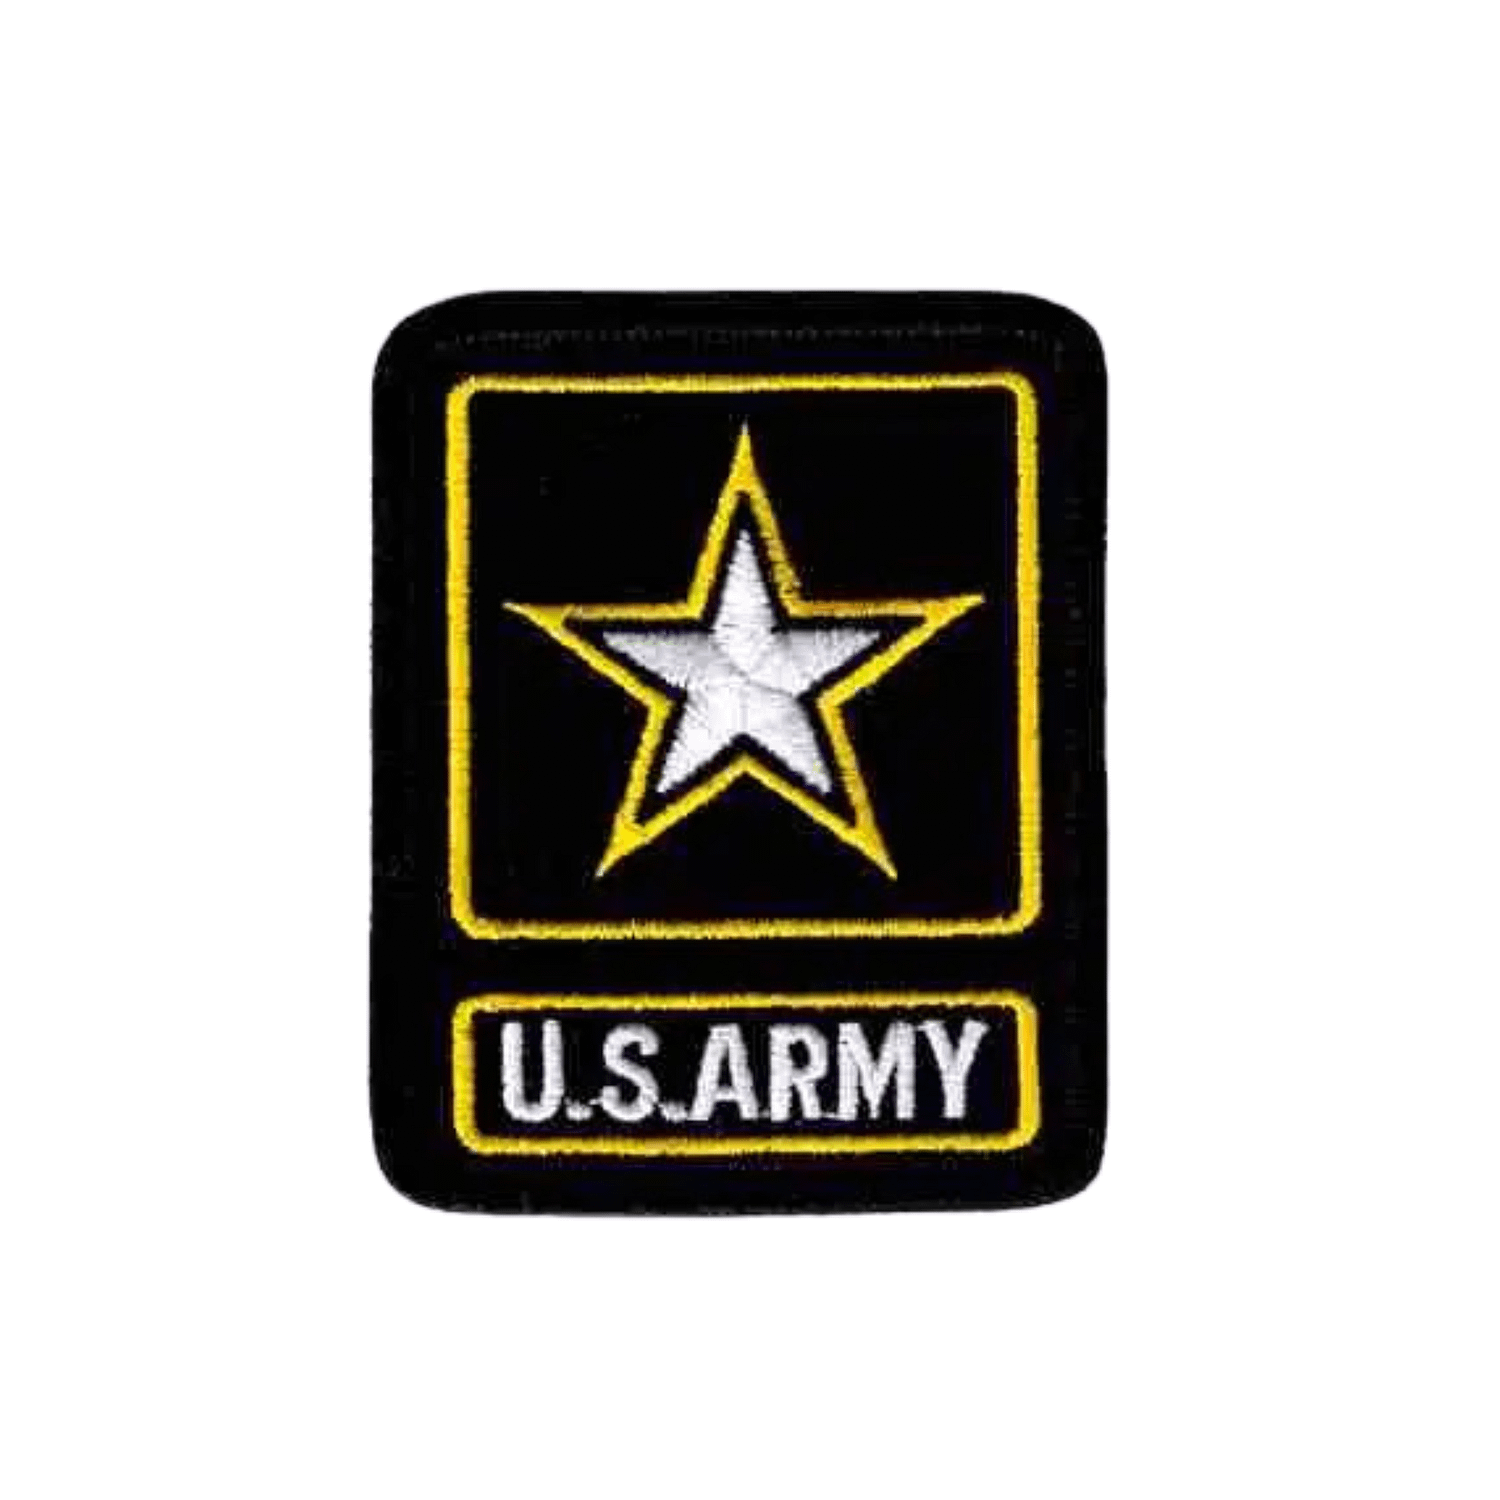 U S Army ARMY OF ONE Iron On Military Patch Applique